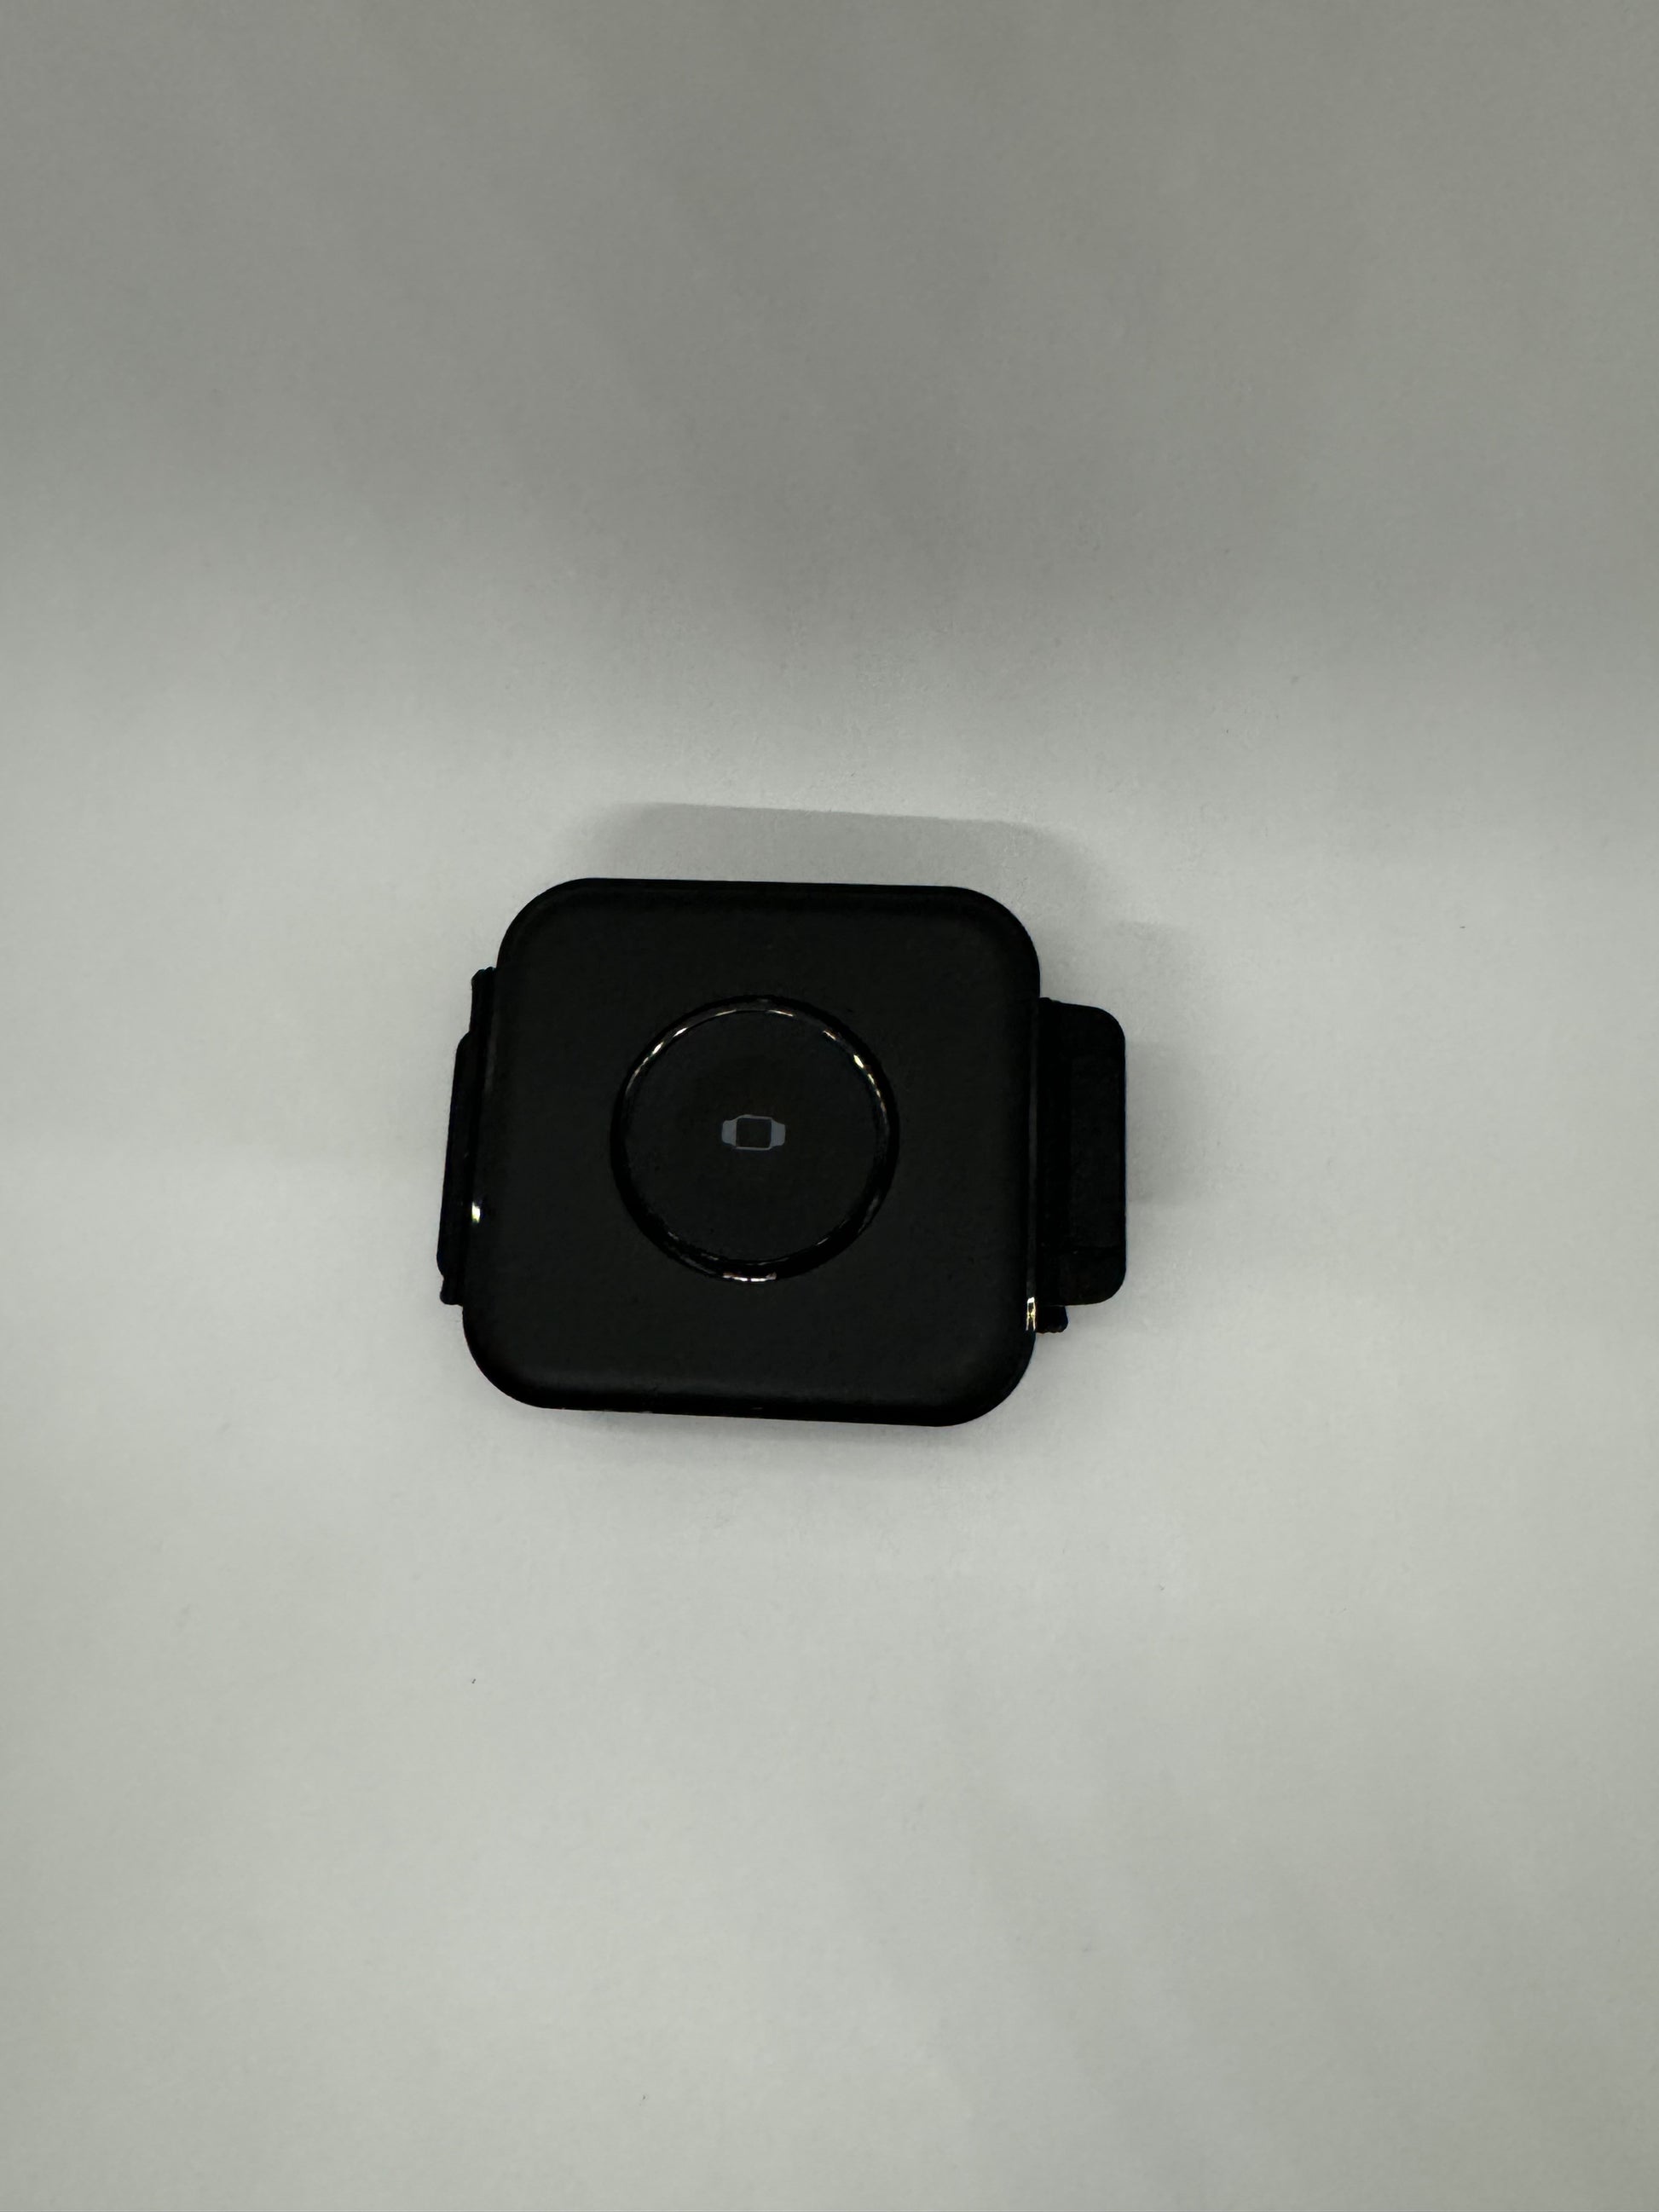 The picture shows a small black square object with rounded corners. It appears to be some sort of electronic device. There is a circular button or dial in the center of the object. The background is plain white. The object is positioned at the bottom of the image.